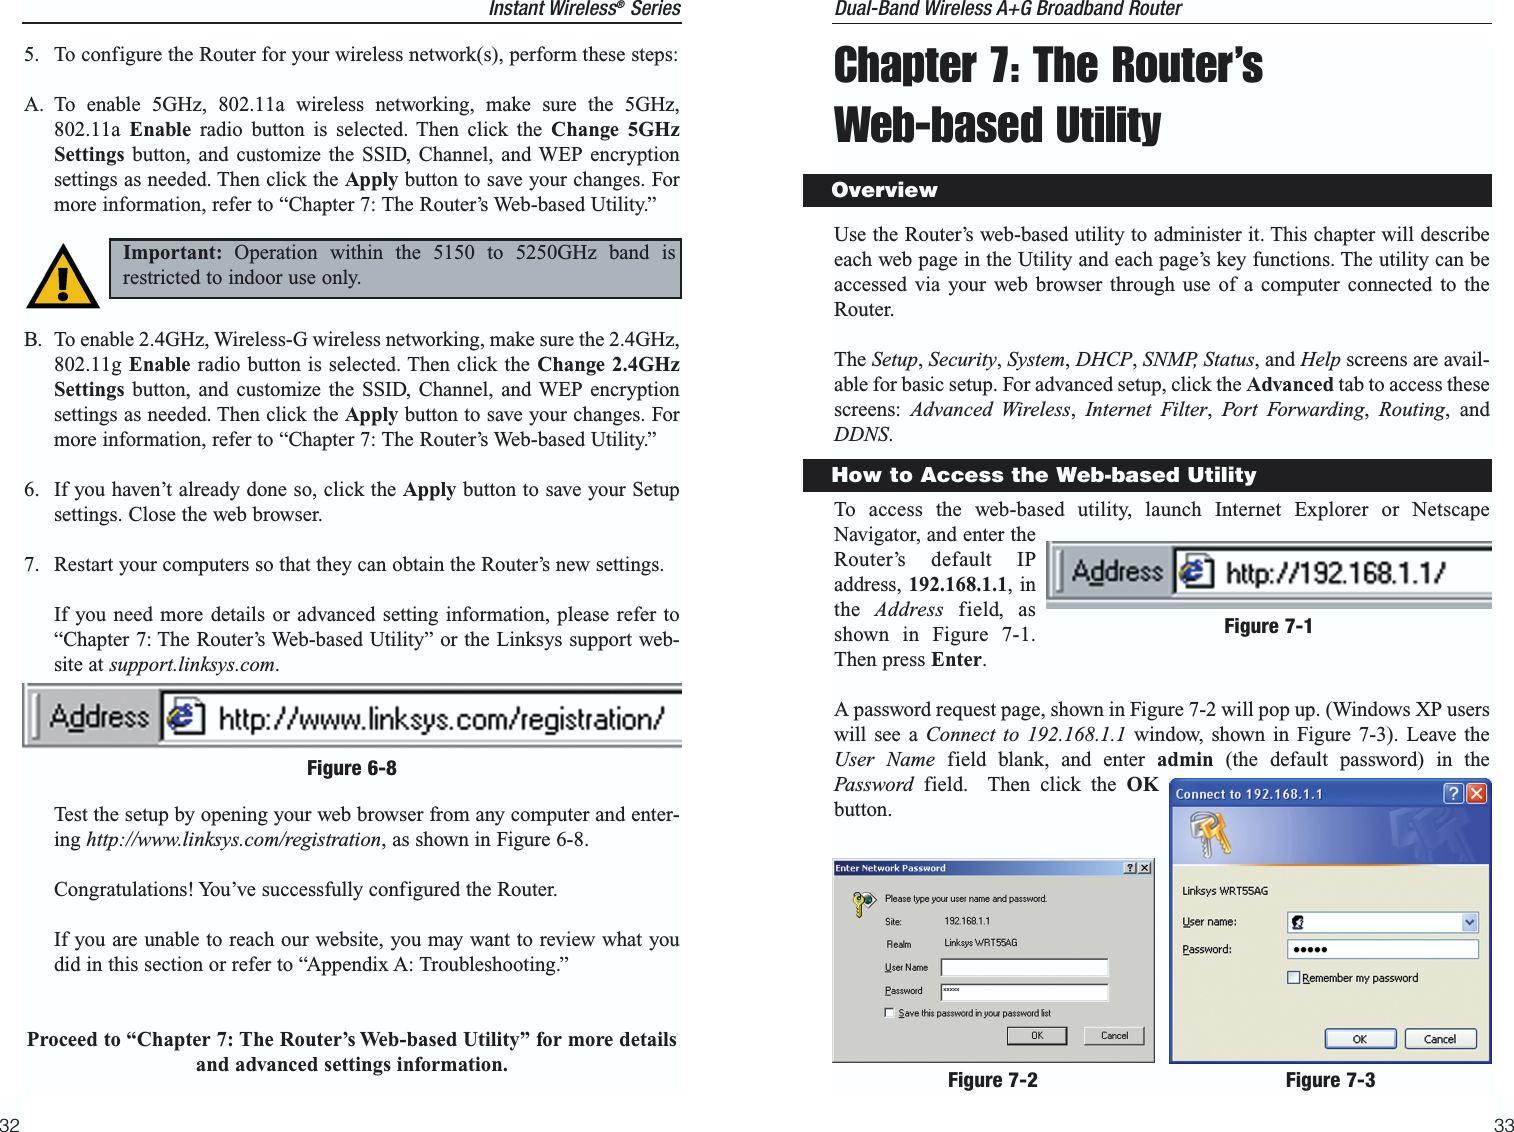 Chapter 7: The Router’s Web-based UtilityUse the Router’s web-based utility to administer it. This chapter will describeeach web page in the Utility and each page’s key functions. The utility can beaccessed via your web browser through use of a computer connected to theRouter.The Setup, Security, System, DHCP, SNMP, Status, and Help screens are avail-able for basic setup. For advanced setup, click the Advanced tab to access thesescreens:  Advanced Wireless,  Internet Filter,  Port Forwarding,  Routing, andDDNS.To access the web-based utility, launch Internet Explorer or NetscapeNavigator, and enter theRouter’s default IPaddress, 192.168.1.1, inthe  Address field, asshown in Figure 7-1.Then press Enter. A password request page, shown in Figure 7-2 will pop up. (Windows XP userswill see a Connect to 192.168.1.1 window, shown in Figure 7-3). Leave theUser Name field blank, and enter admin (the default password) in thePassword field.  Then click the OKbutton.33Instant Wireless®Series5. To configure the Router for your wireless network(s), perform these steps:A. To enable 5GHz, 802.11a wireless networking, make sure the 5GHz,802.11a  Enable radio button is selected. Then click the Change 5GHzSettings button, and customize the SSID, Channel, and WEP encryptionsettings as needed. Then click the Apply button to save your changes. Formore information, refer to “Chapter 7: The Router’s Web-based Utility.”B. To enable 2.4GHz, Wireless-G wireless networking, make sure the 2.4GHz,802.11g Enable radio button is selected. Then click the Change 2.4GHzSettings button, and customize the SSID, Channel, and WEP encryptionsettings as needed. Then click the Apply button to save your changes. Formore information, refer to “Chapter 7: The Router’s Web-based Utility.”6. If you haven’t already done so, click the Apply button to save your Setupsettings. Close the web browser.7. Restart your computers so that they can obtain the Router’s new settings.If you need more details or advanced setting information, please refer to“Chapter 7: The Router’s Web-based Utility” or the Linksys support web-site at support.linksys.com.Test the setup by opening your web browser from any computer and enter-ing http://www.linksys.com/registration, as shown in Figure 6-8.Congratulations! You’ve successfully configured the Router. If you are unable to reach our website, you may want to review what youdid in this section or refer to “Appendix A: Troubleshooting.”Proceed to “Chapter 7: The Router’s Web-based Utility” for more detailsand advanced settings information.32Dual-Band Wireless A+G Broadband Router OverviewHow to Access the Web-based UtilityFigure 6-8Important: Operation within the 5150 to 5250GHz band isrestricted to indoor use only.Figure 7-1Figure 7-2 Figure 7-3